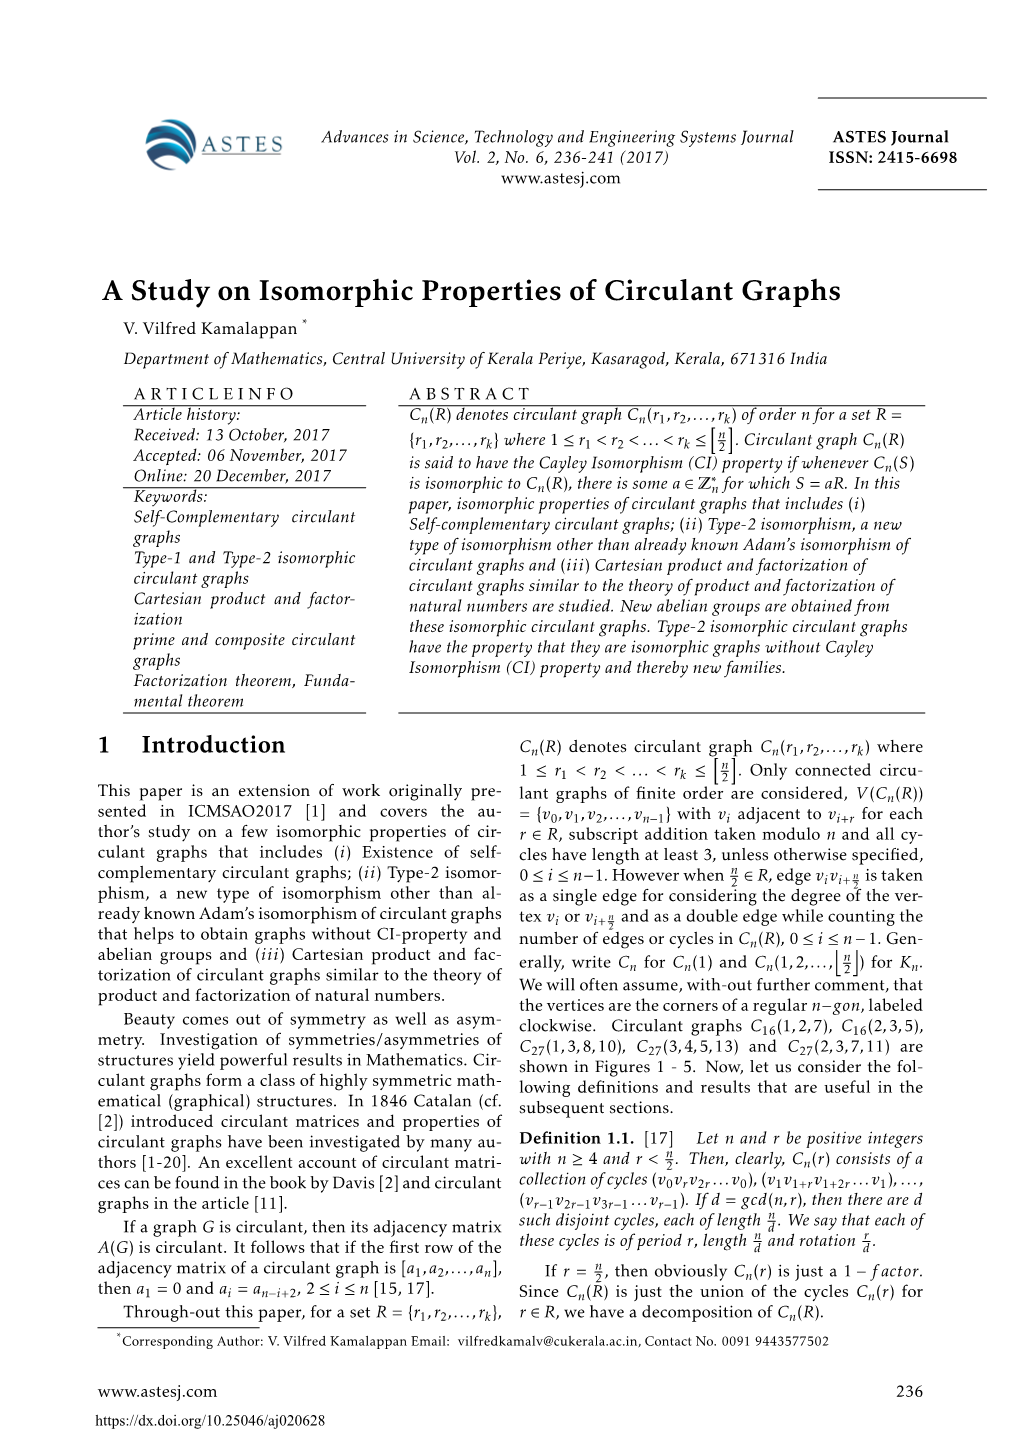 A Study on Isomorphic Properties of Circulant Graphs V